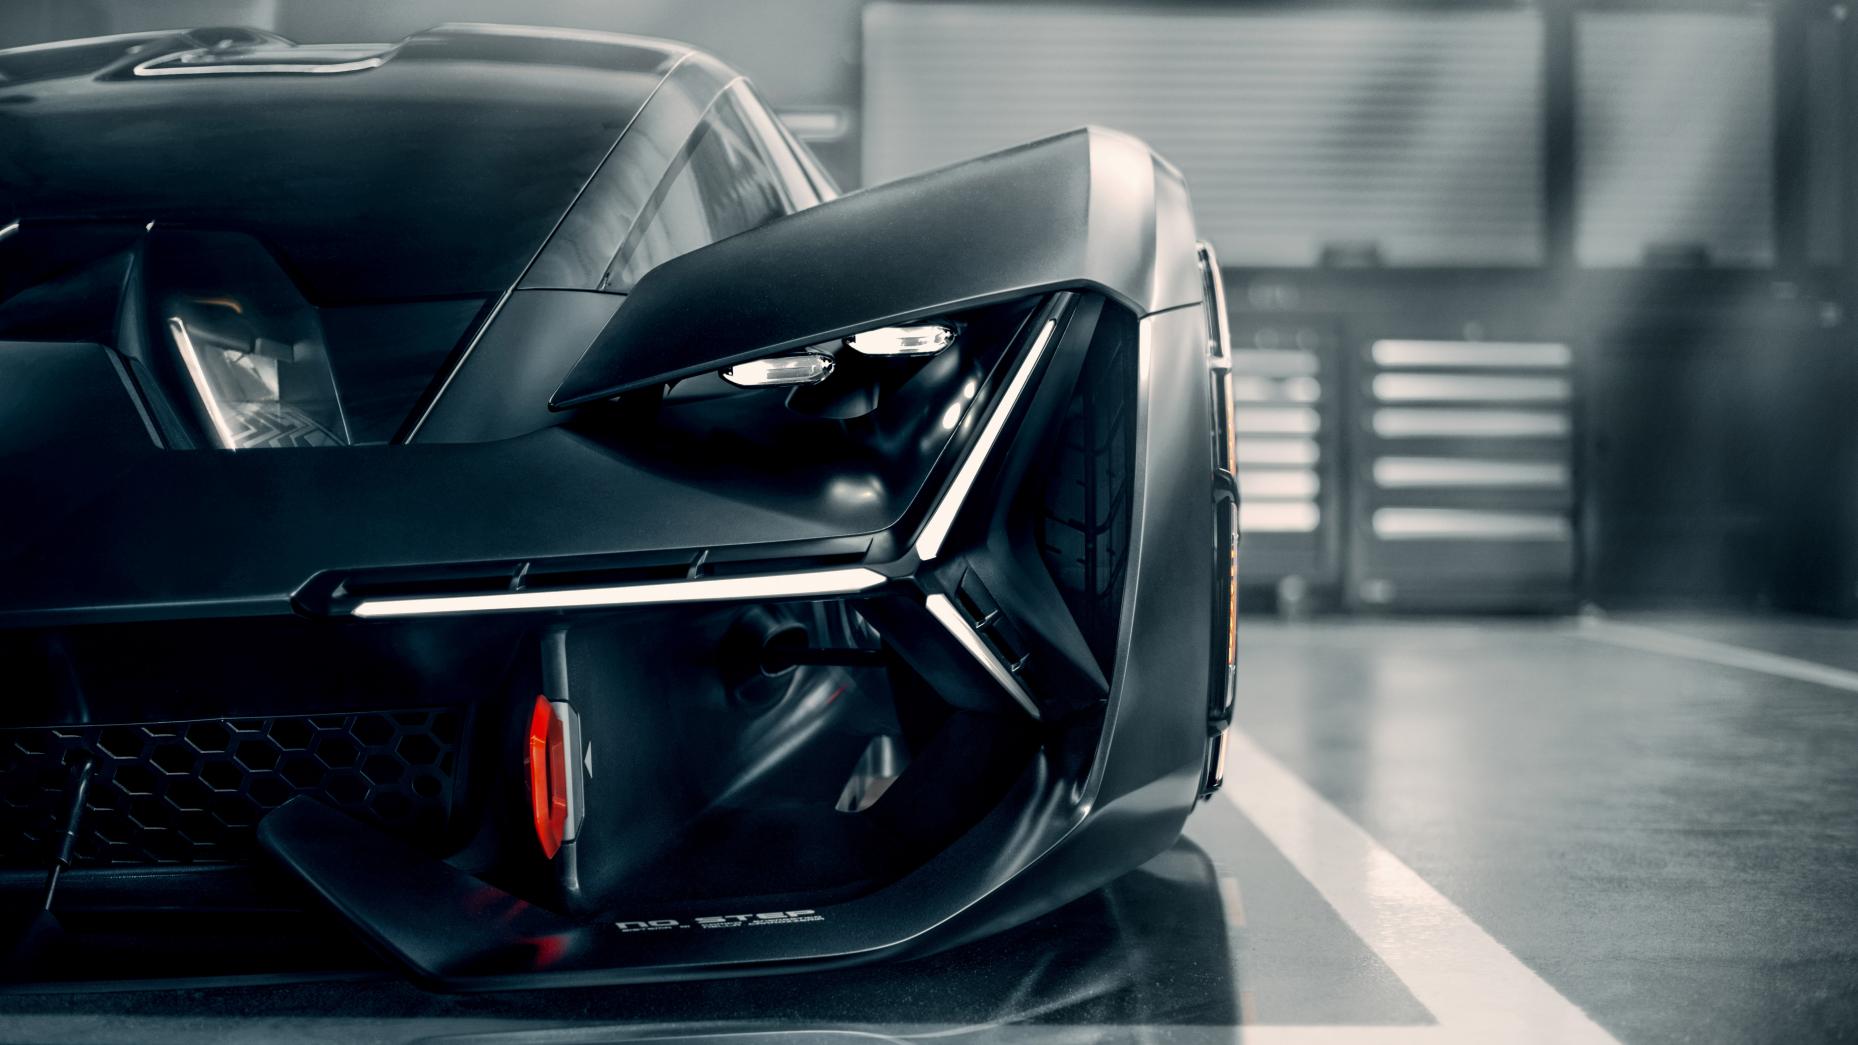 Lamborghini Terzo Millennio Is The Meanest Thing We've Ever Seen